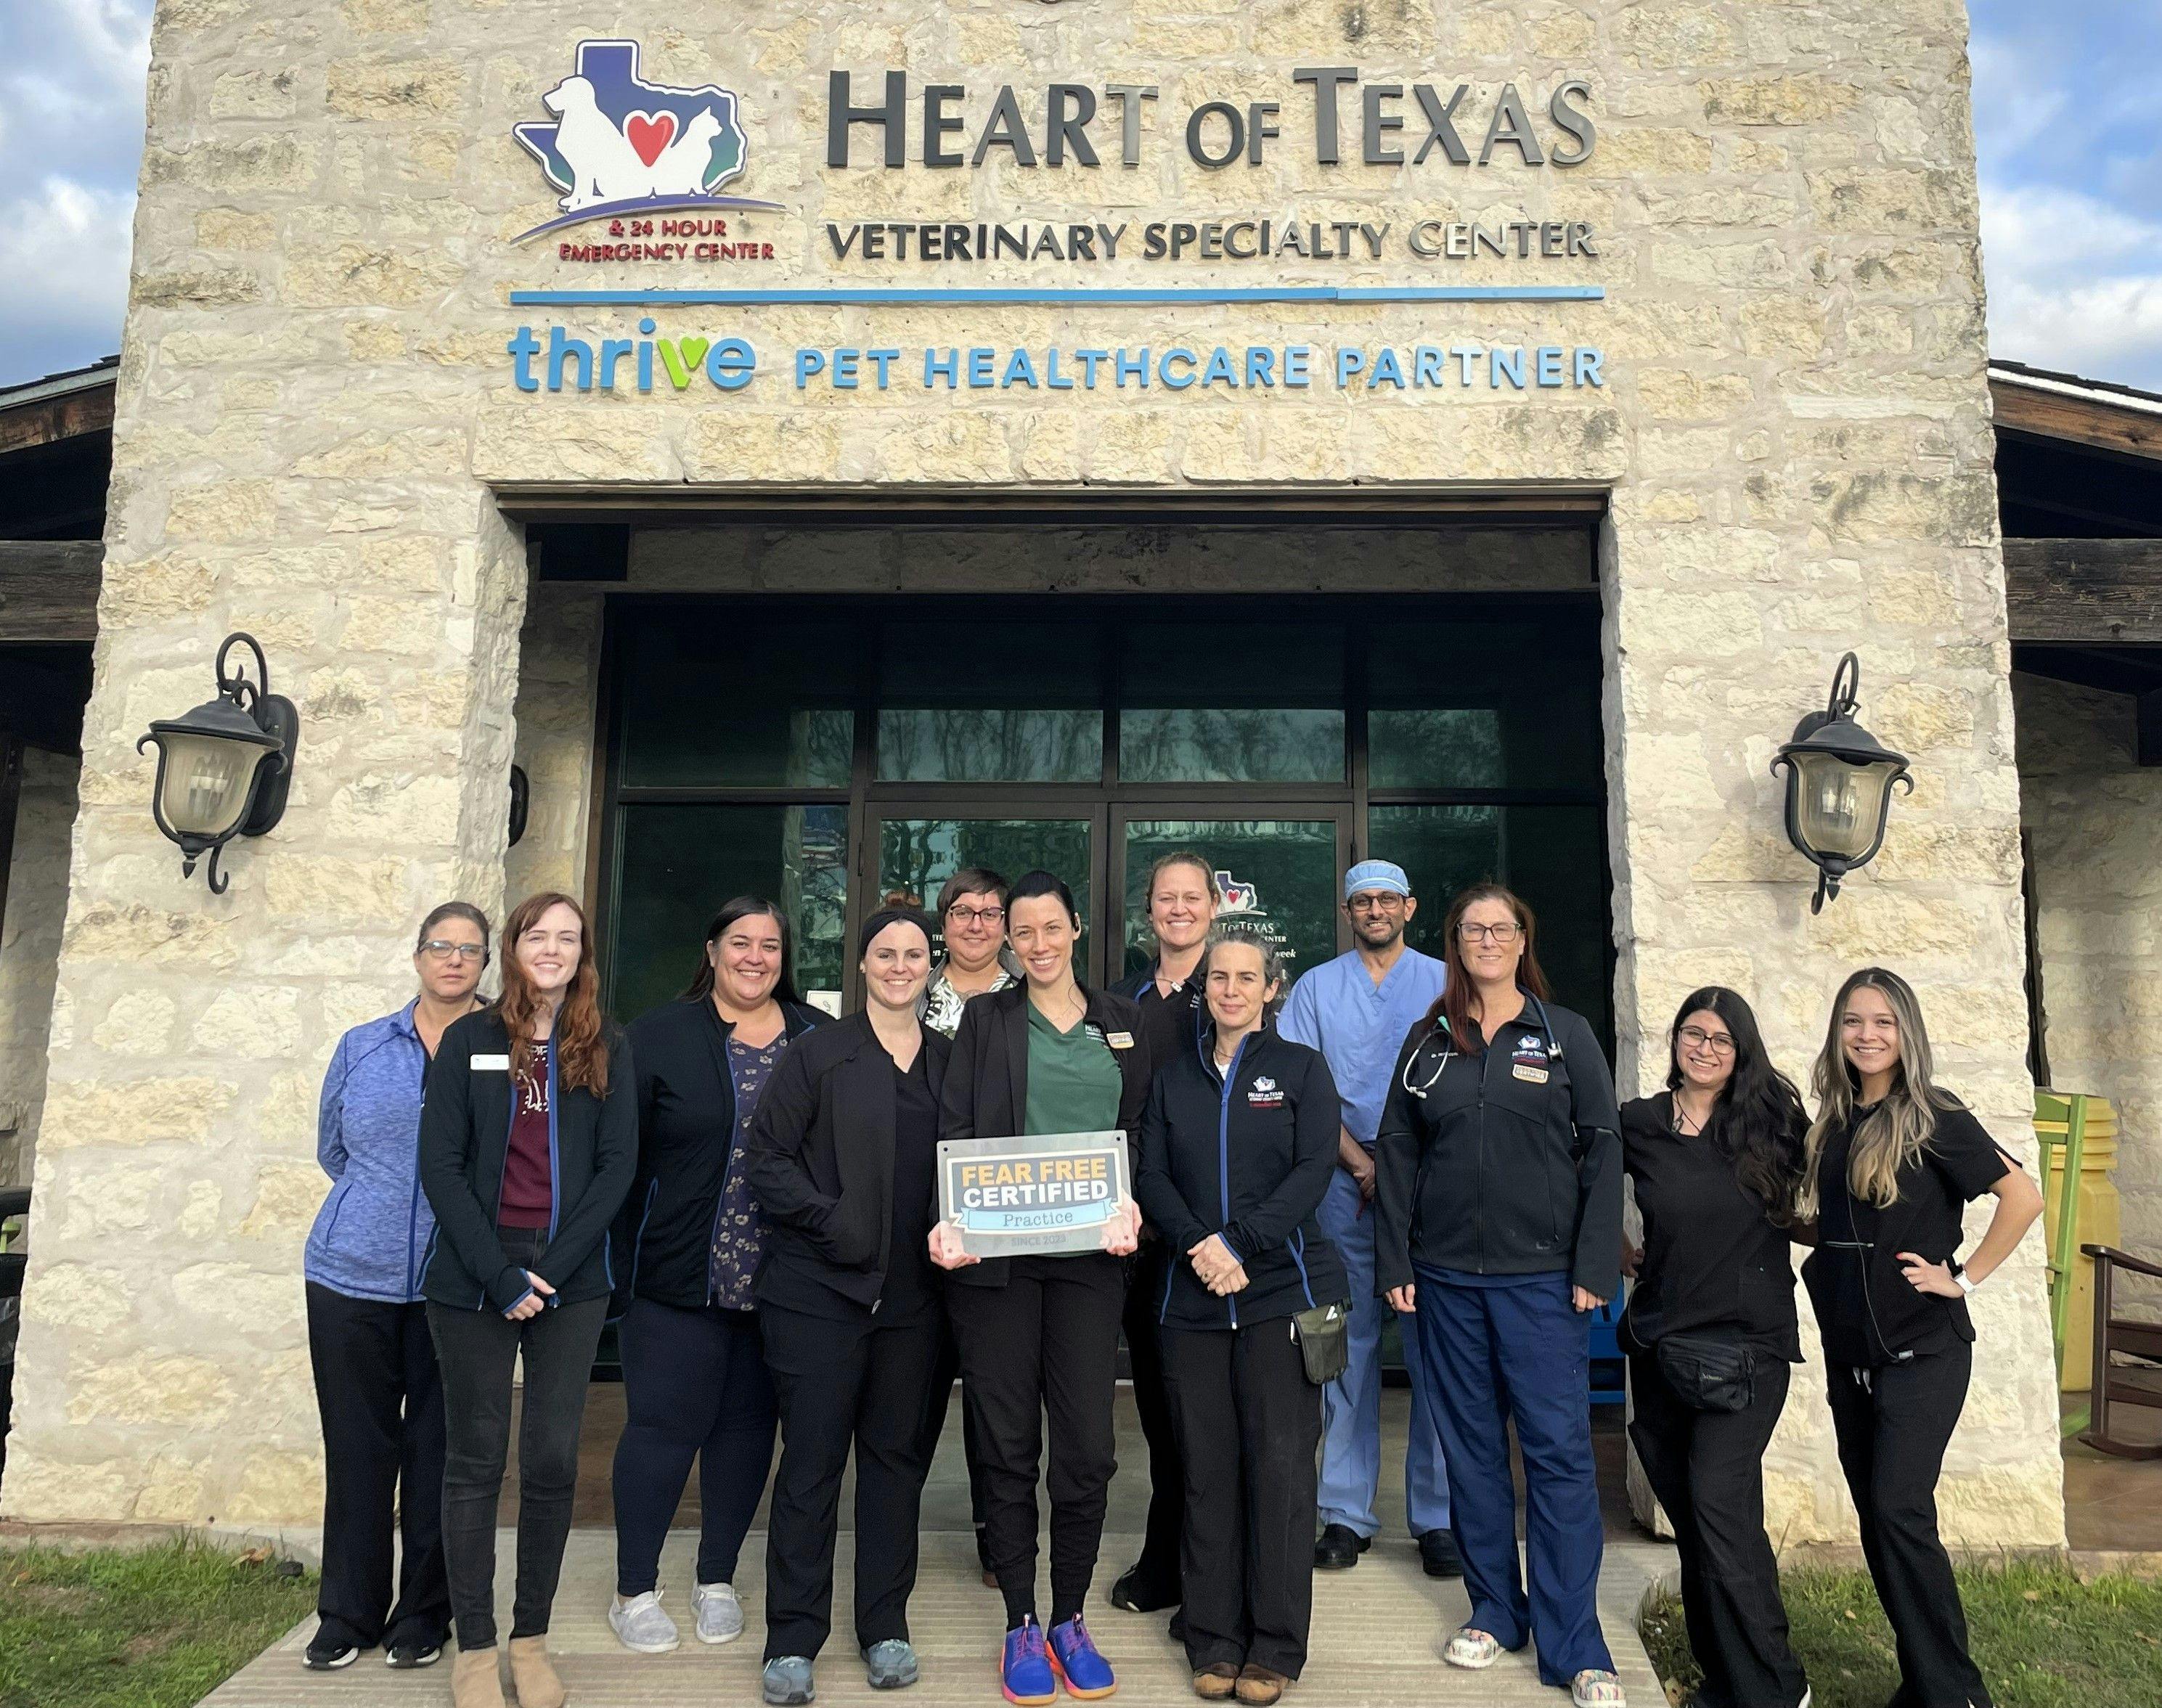 Members of the Heart of Texas Veterinary Specialty and 24-Hour Emergency Center team with their Fear Free certification (Image courtesy of Thrive Pet Healthcare)